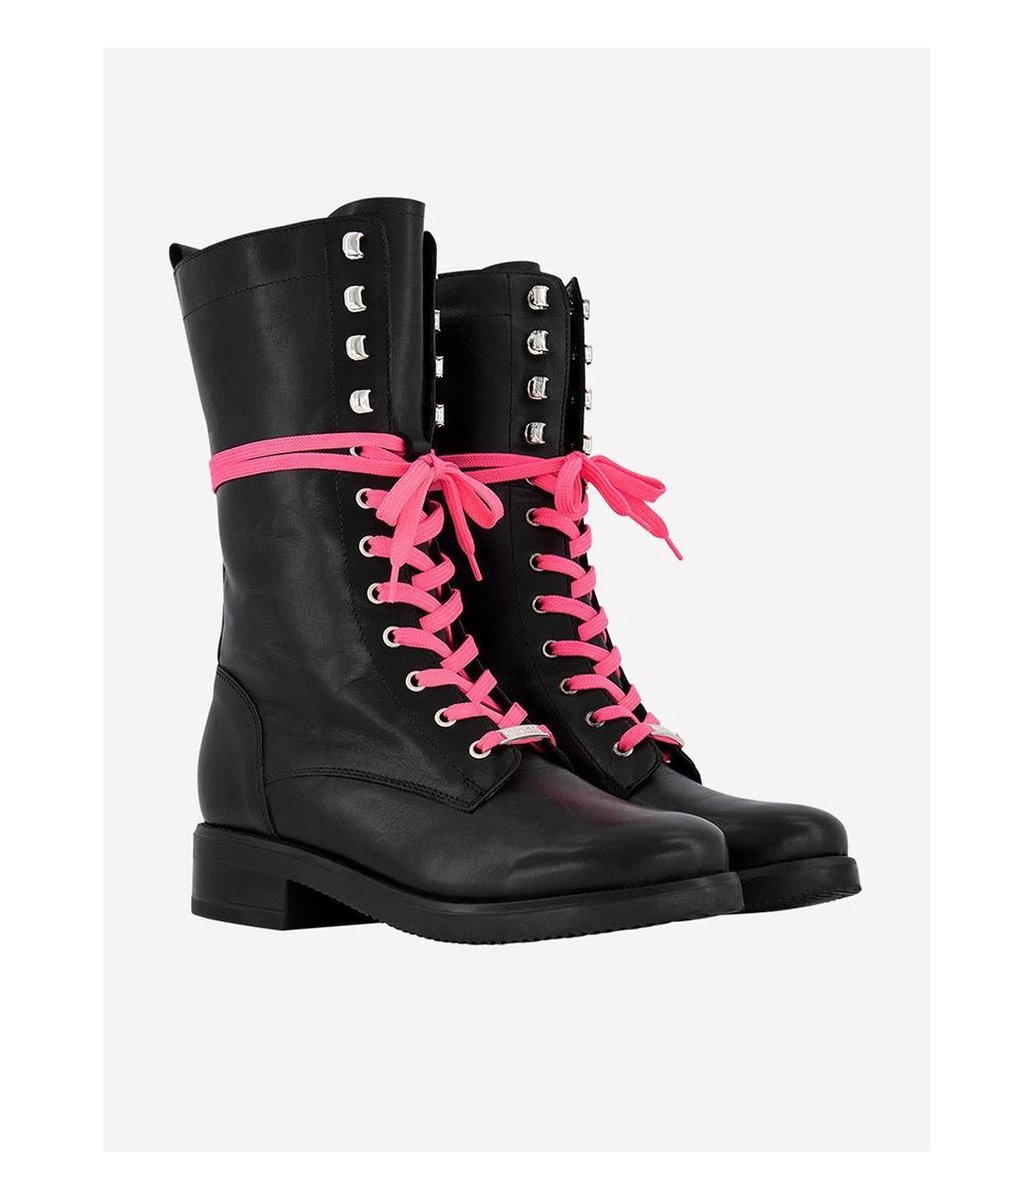 Nikkie Fluo Lace Boots 9-896 2001 Fluo Miami Pink | bol.com